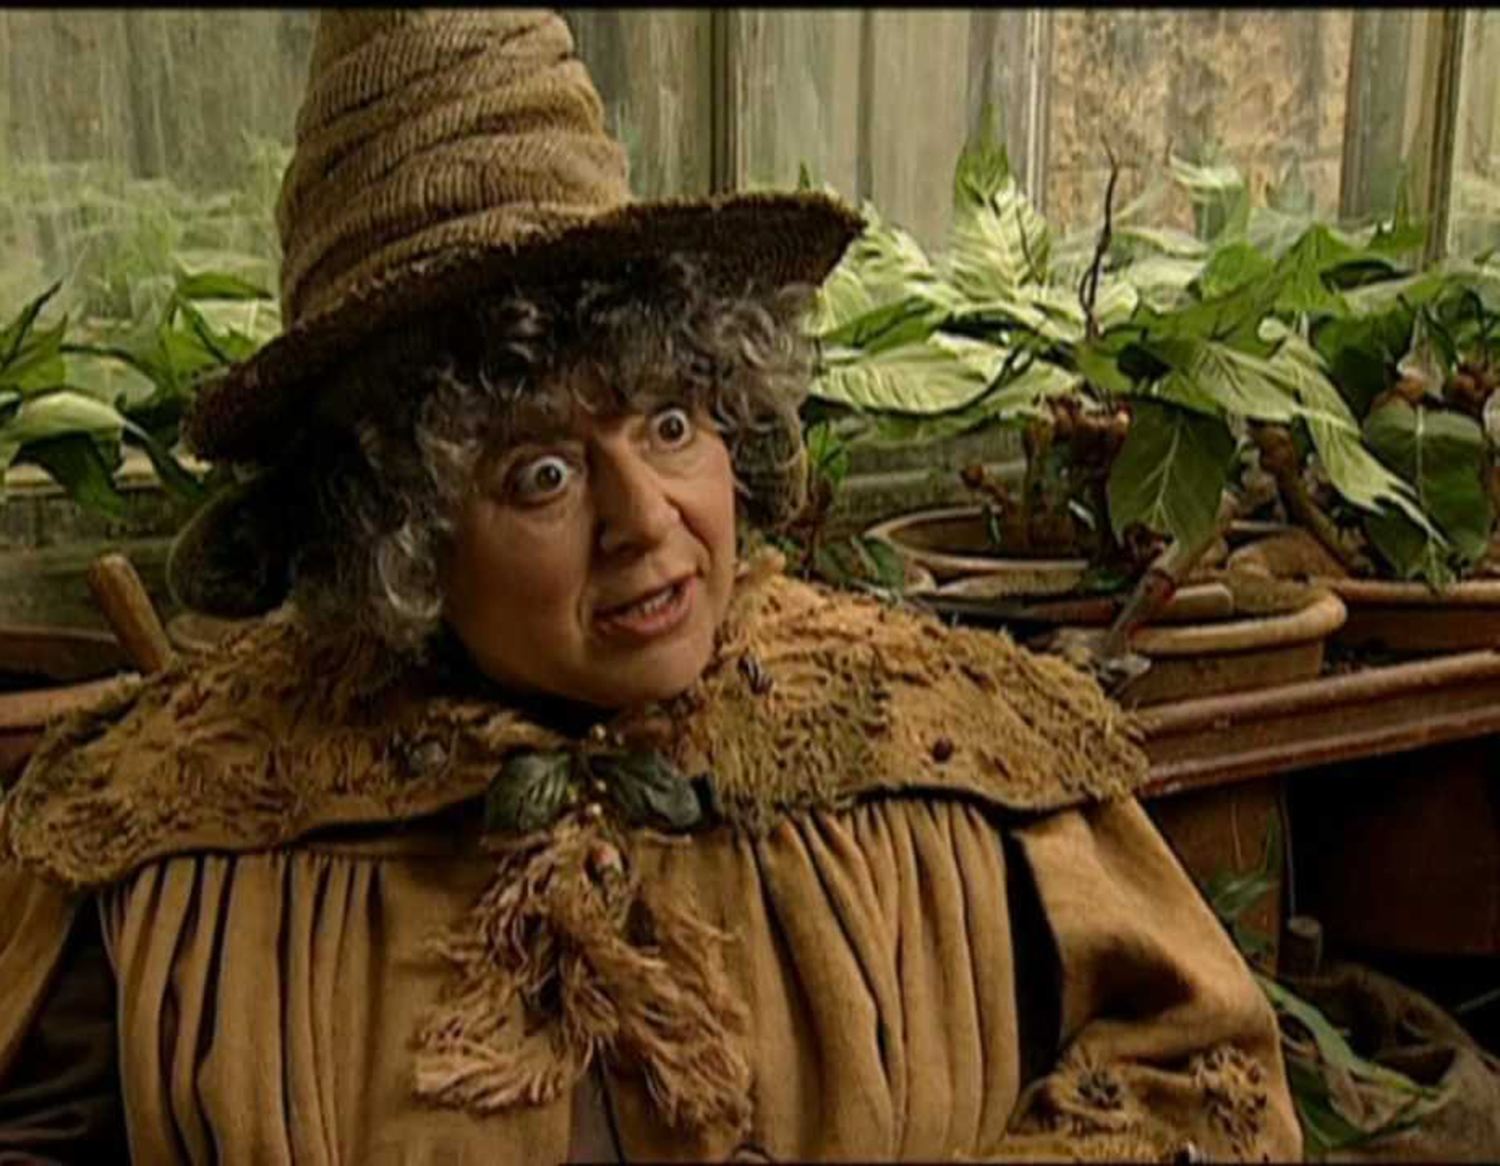 The actress - who played professor Sprout - told fans to 'grow up'